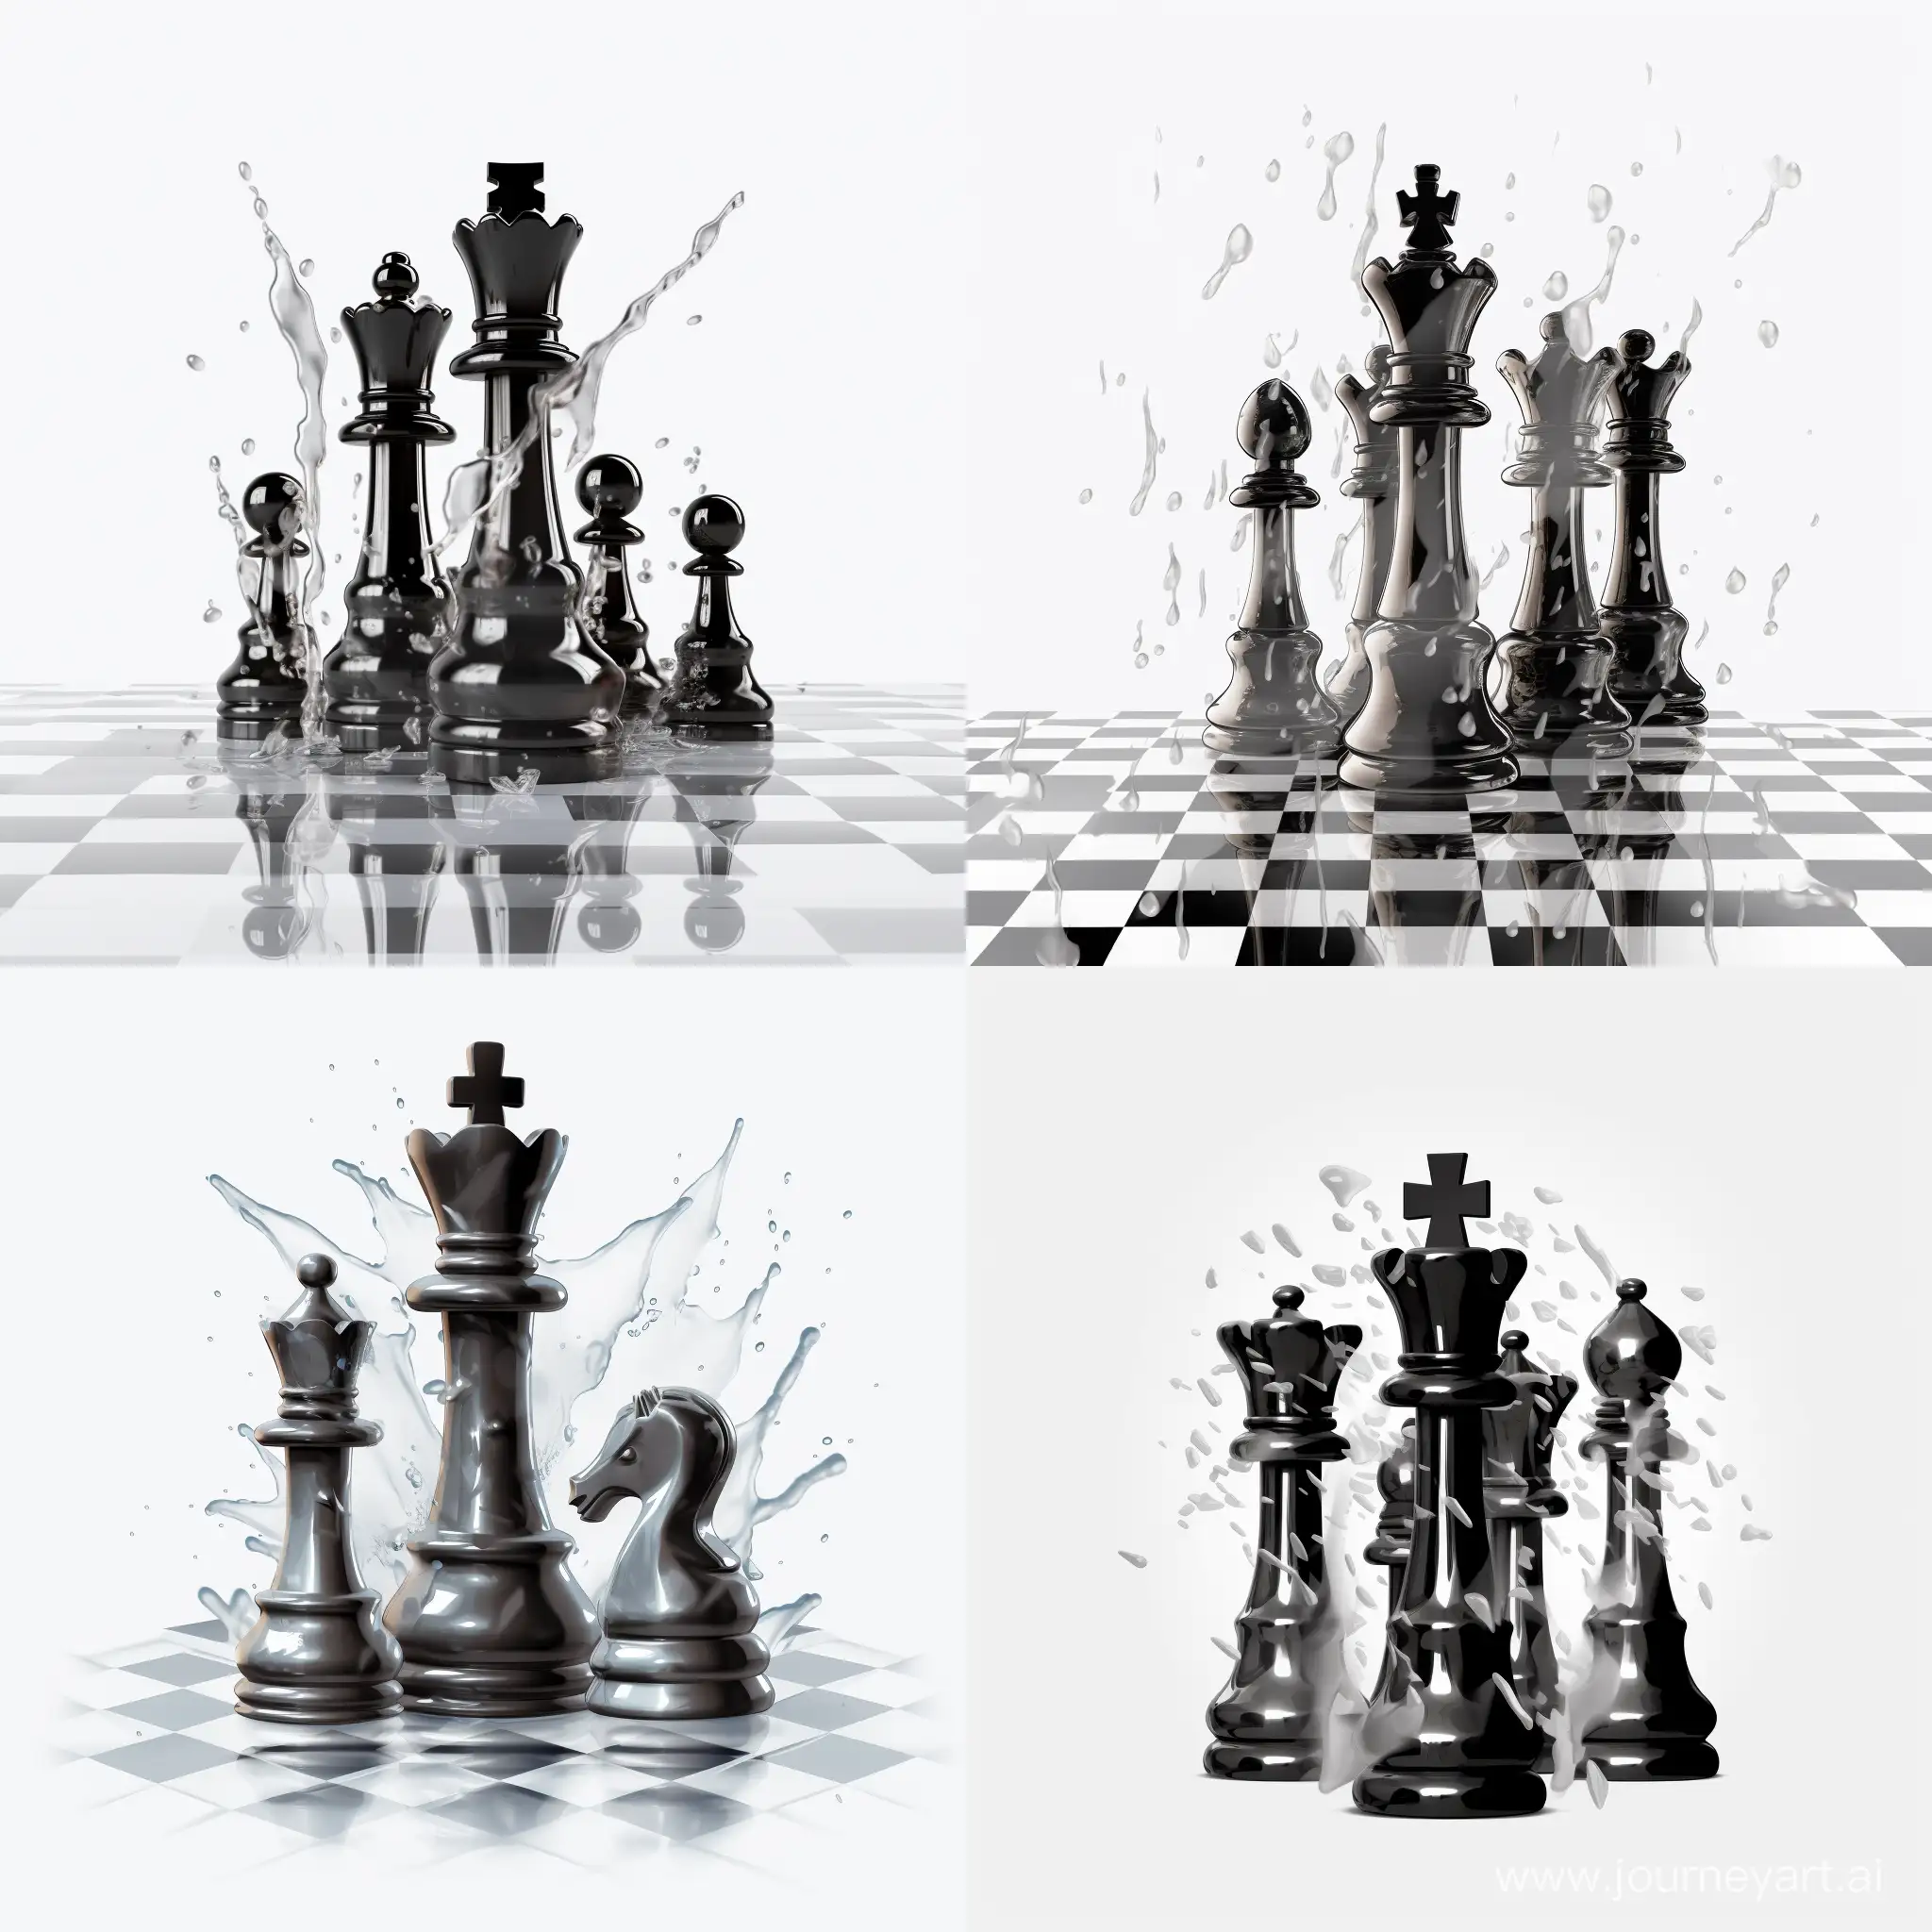 Chess-Pieces-Falling-in-Transparent-Rain-Abstract-Art